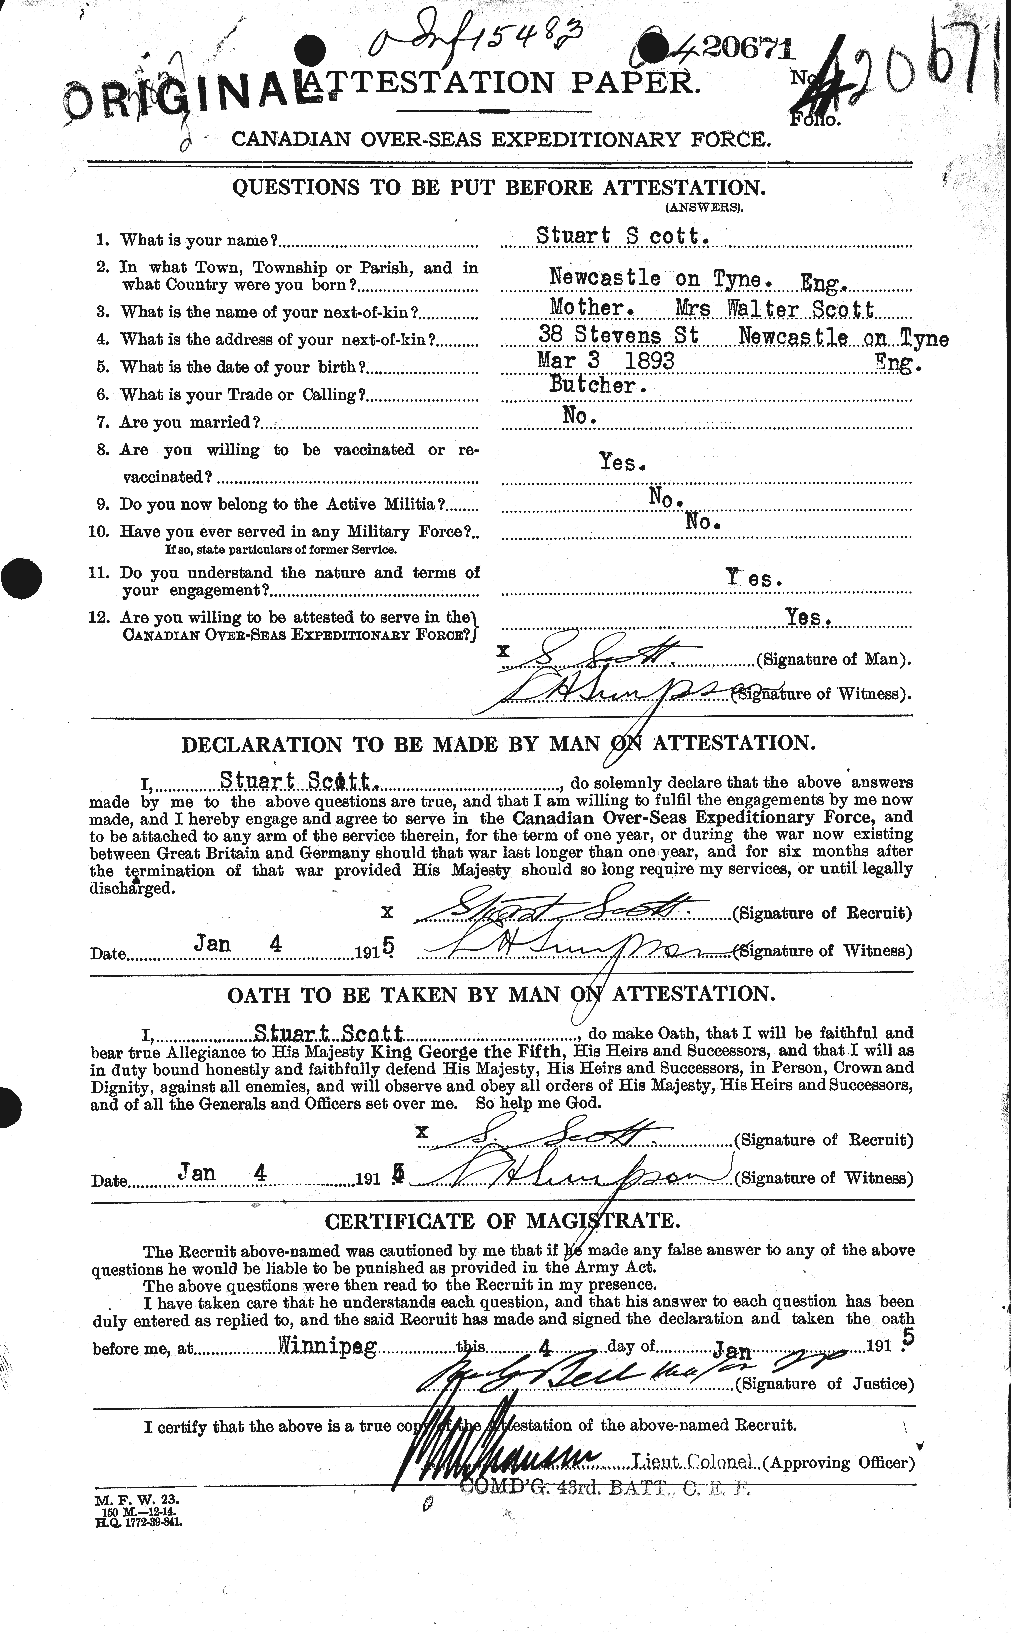 Personnel Records of the First World War - CEF 088554a